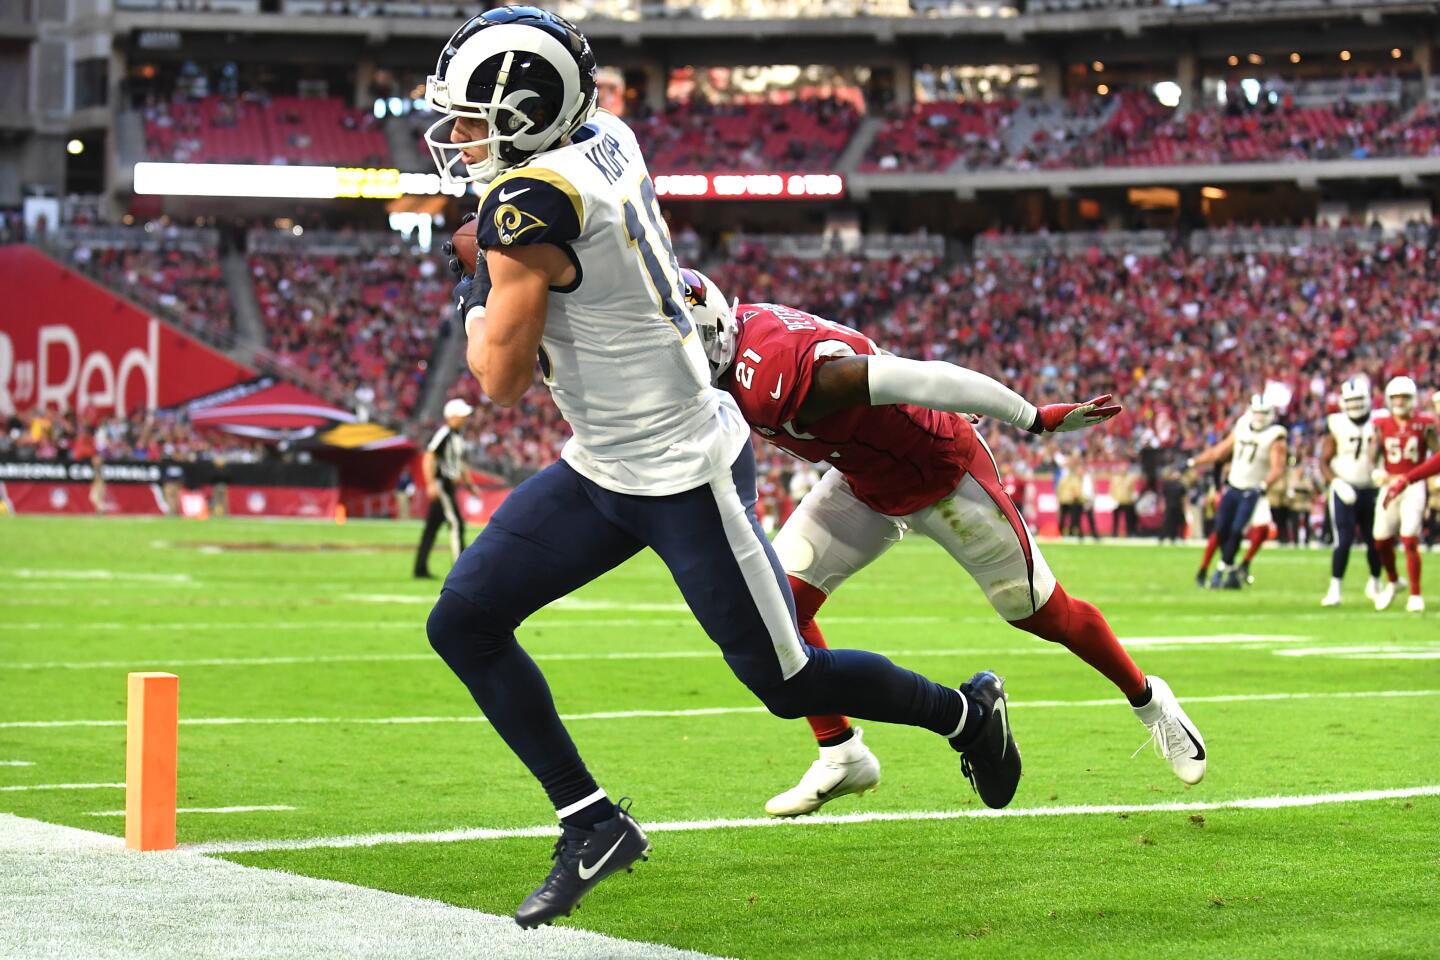 Rams wide receiver Cooper Kupp catches a touchdown pass in front of Cardinals cornerback Patrick Peterson.